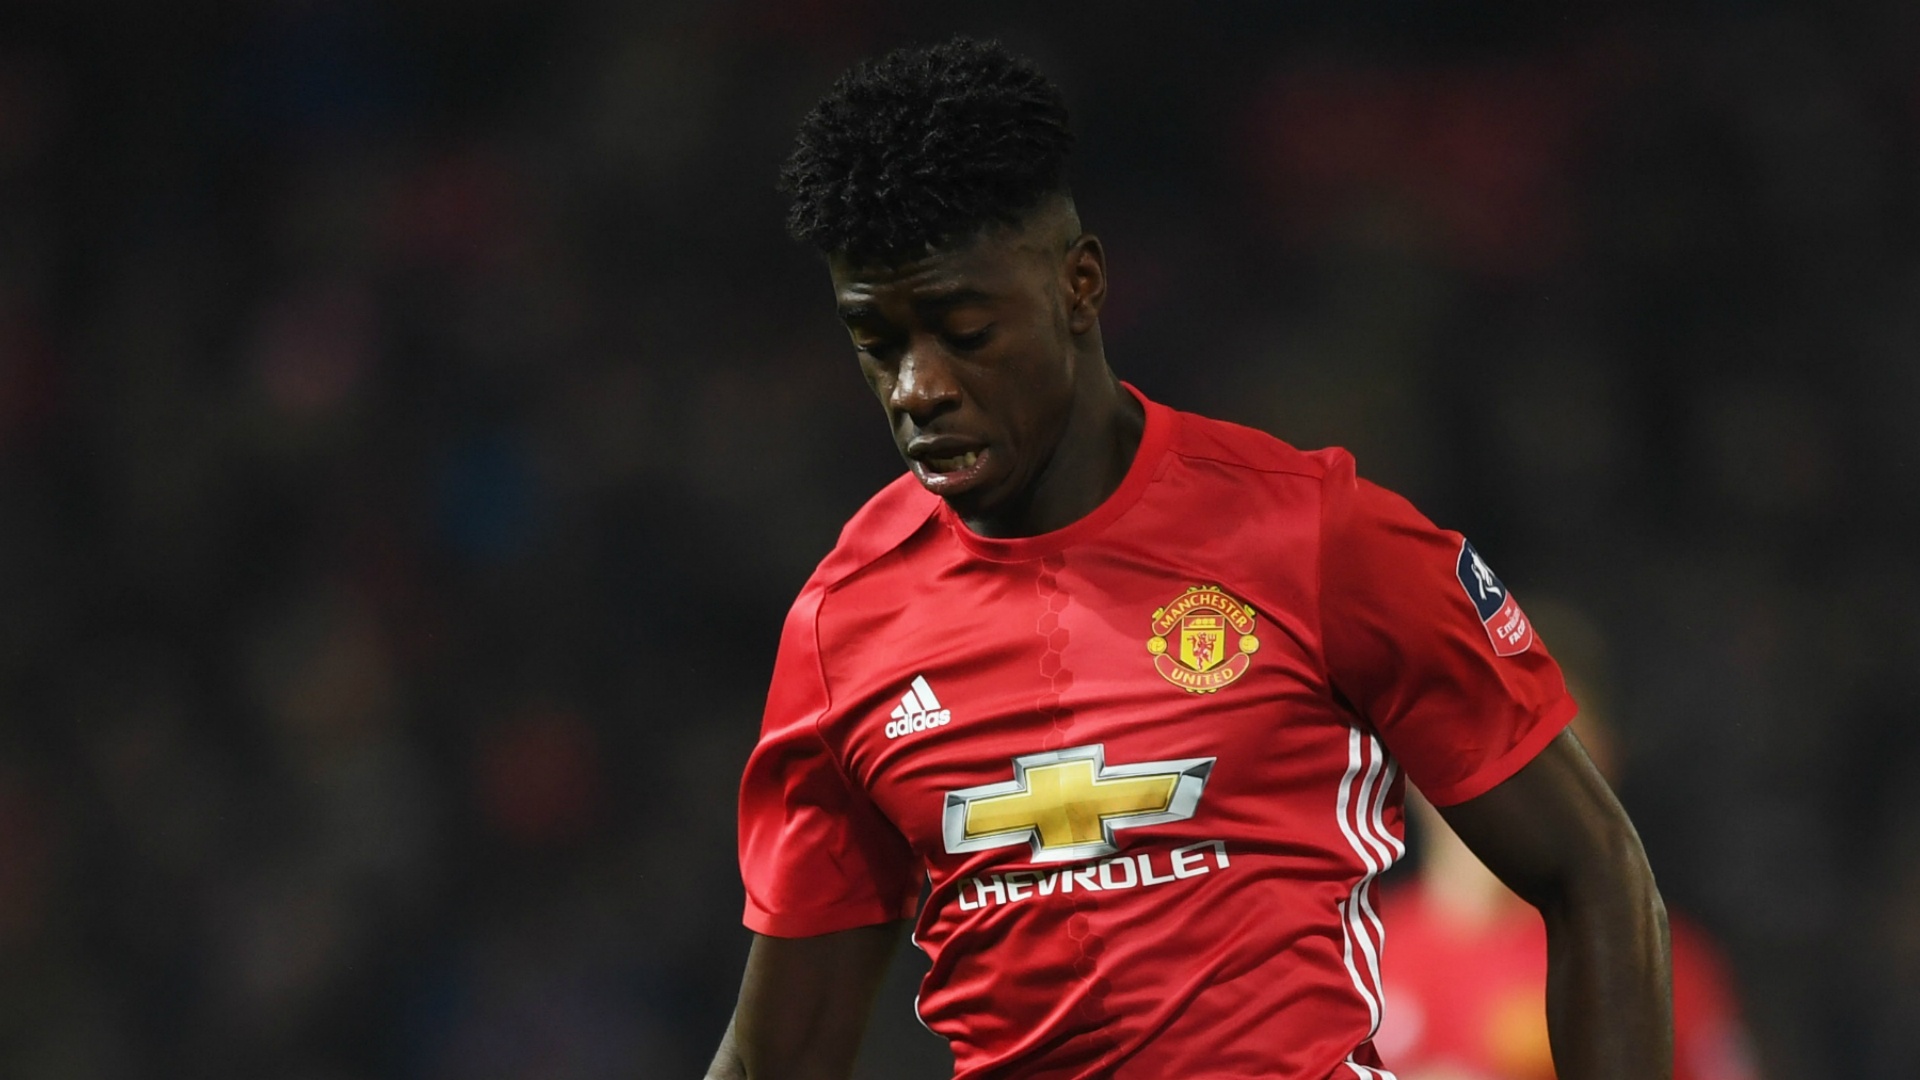 Mourinho rewards Tuanzebe with new Manchester United deal